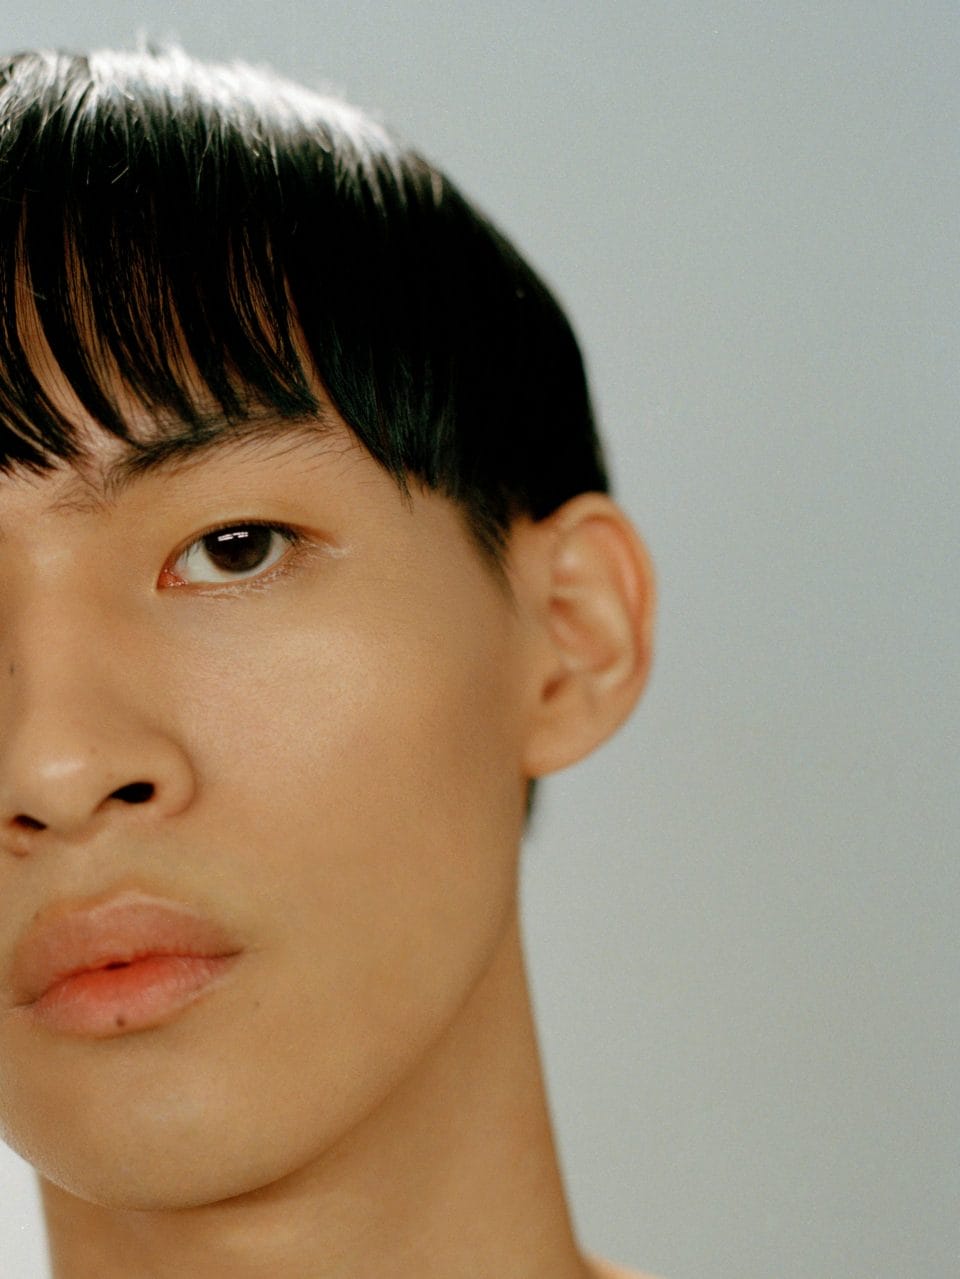 The Boredom Economy of Spring Summer 2022's Grooming Trends